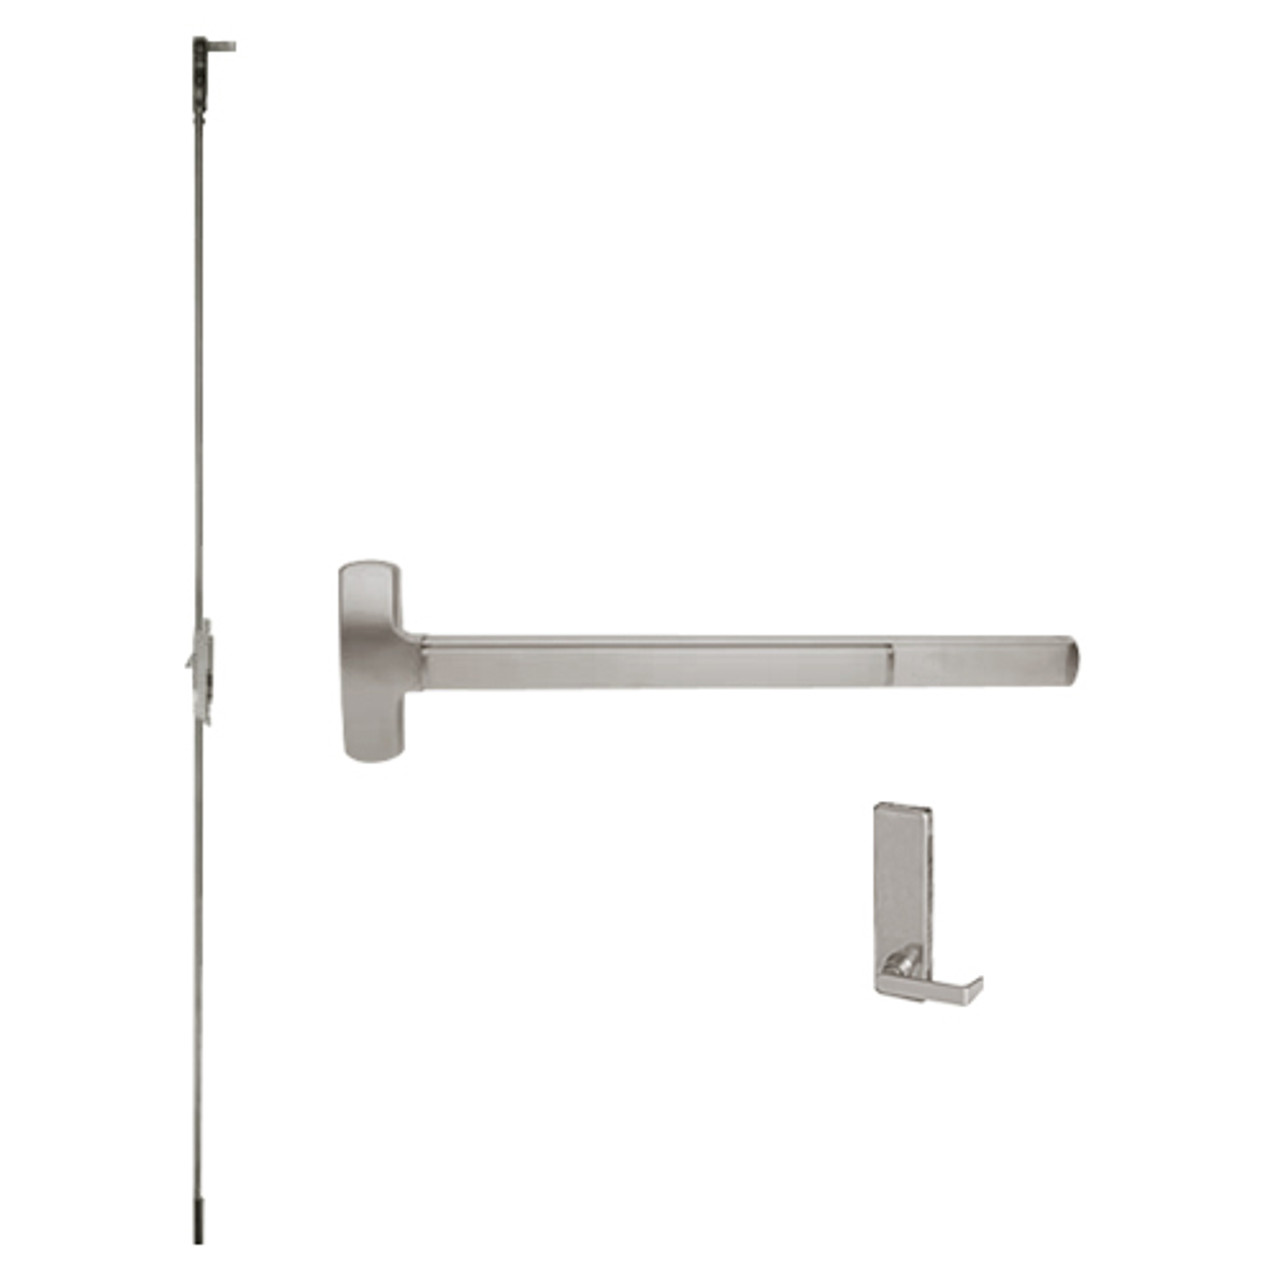 F-25-C-L-BE-DANE-US32D-2-LHR Falcon Exit Device in Satin Stainless Steel